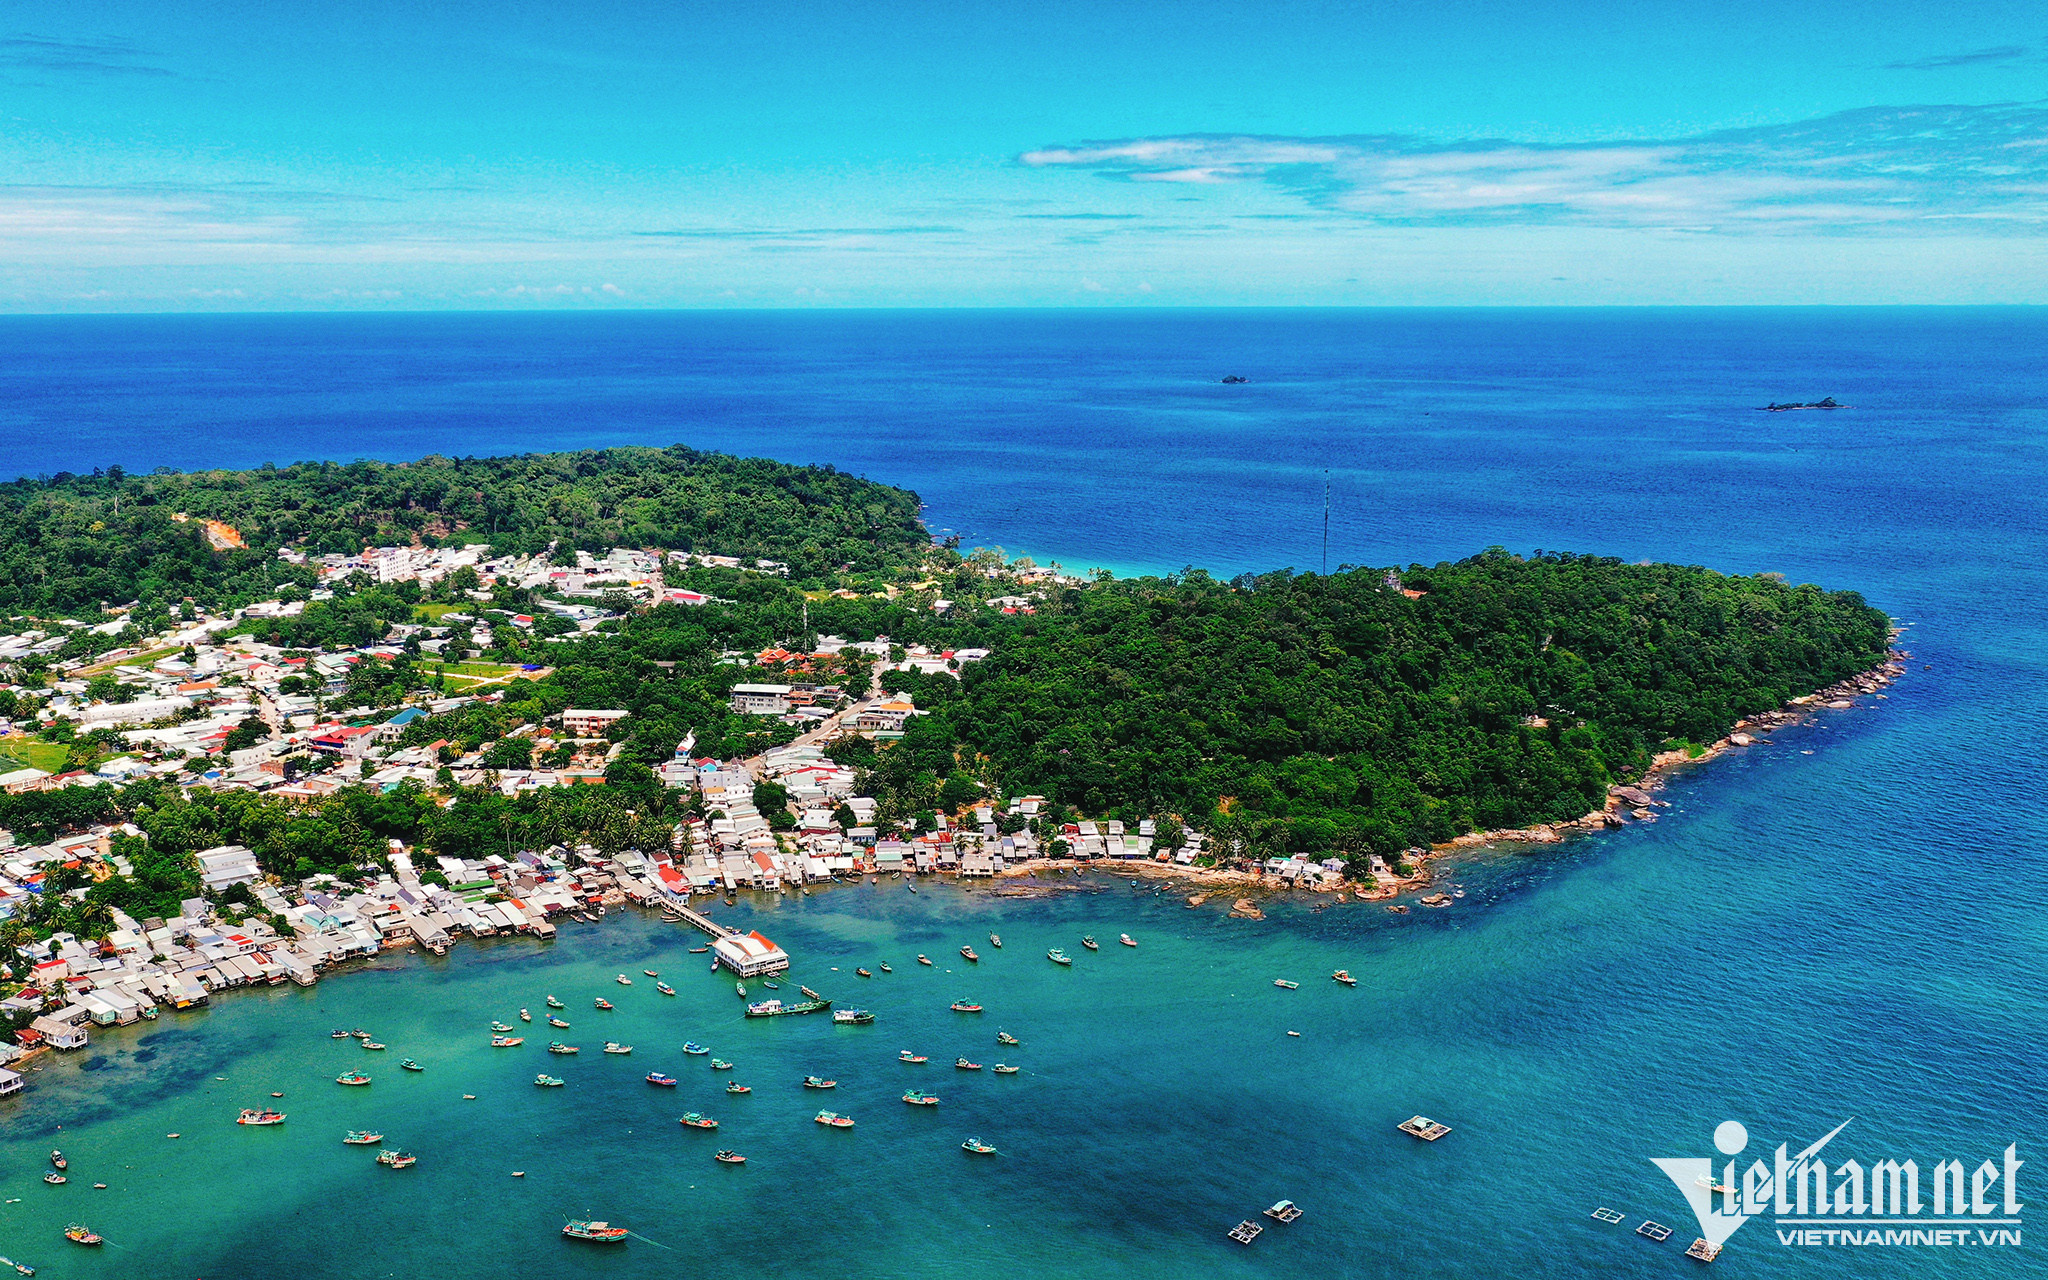 Phu Quoc to become 'livable city for global citizens'